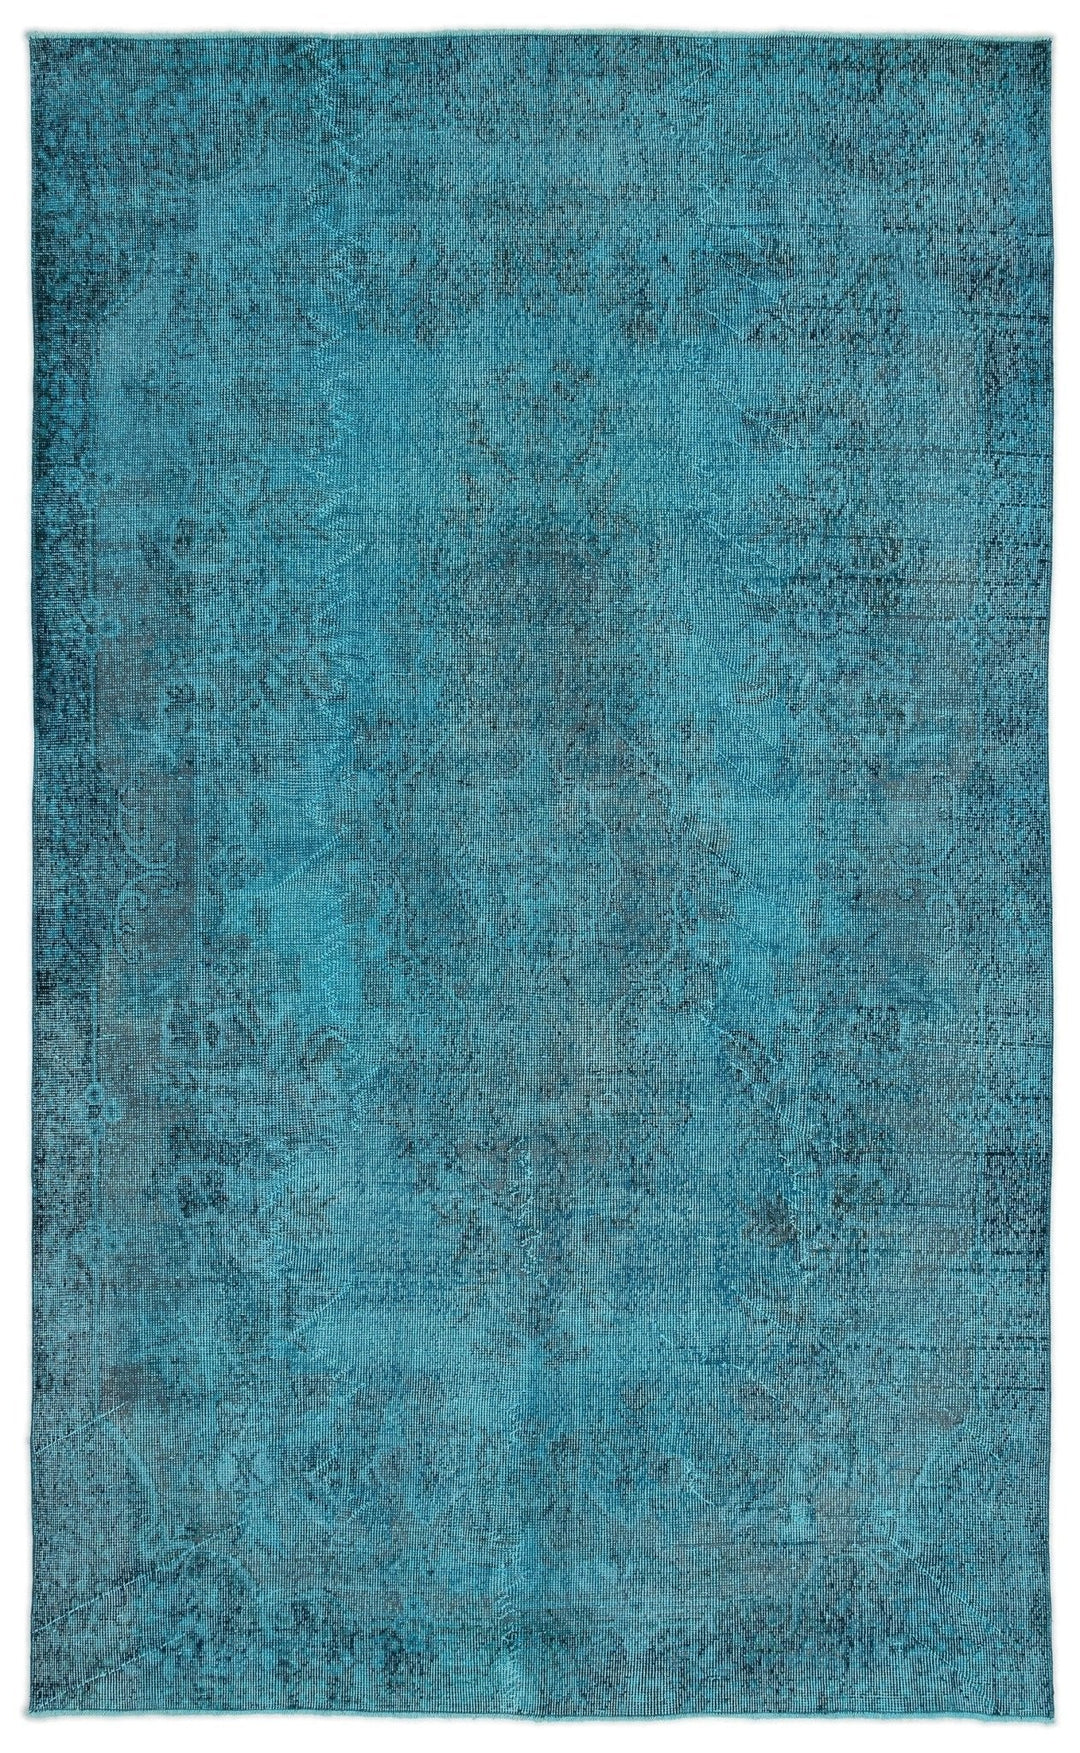 Athens 14976 Turquoise Tumbled Wool Hand Woven Rug 180 x 288